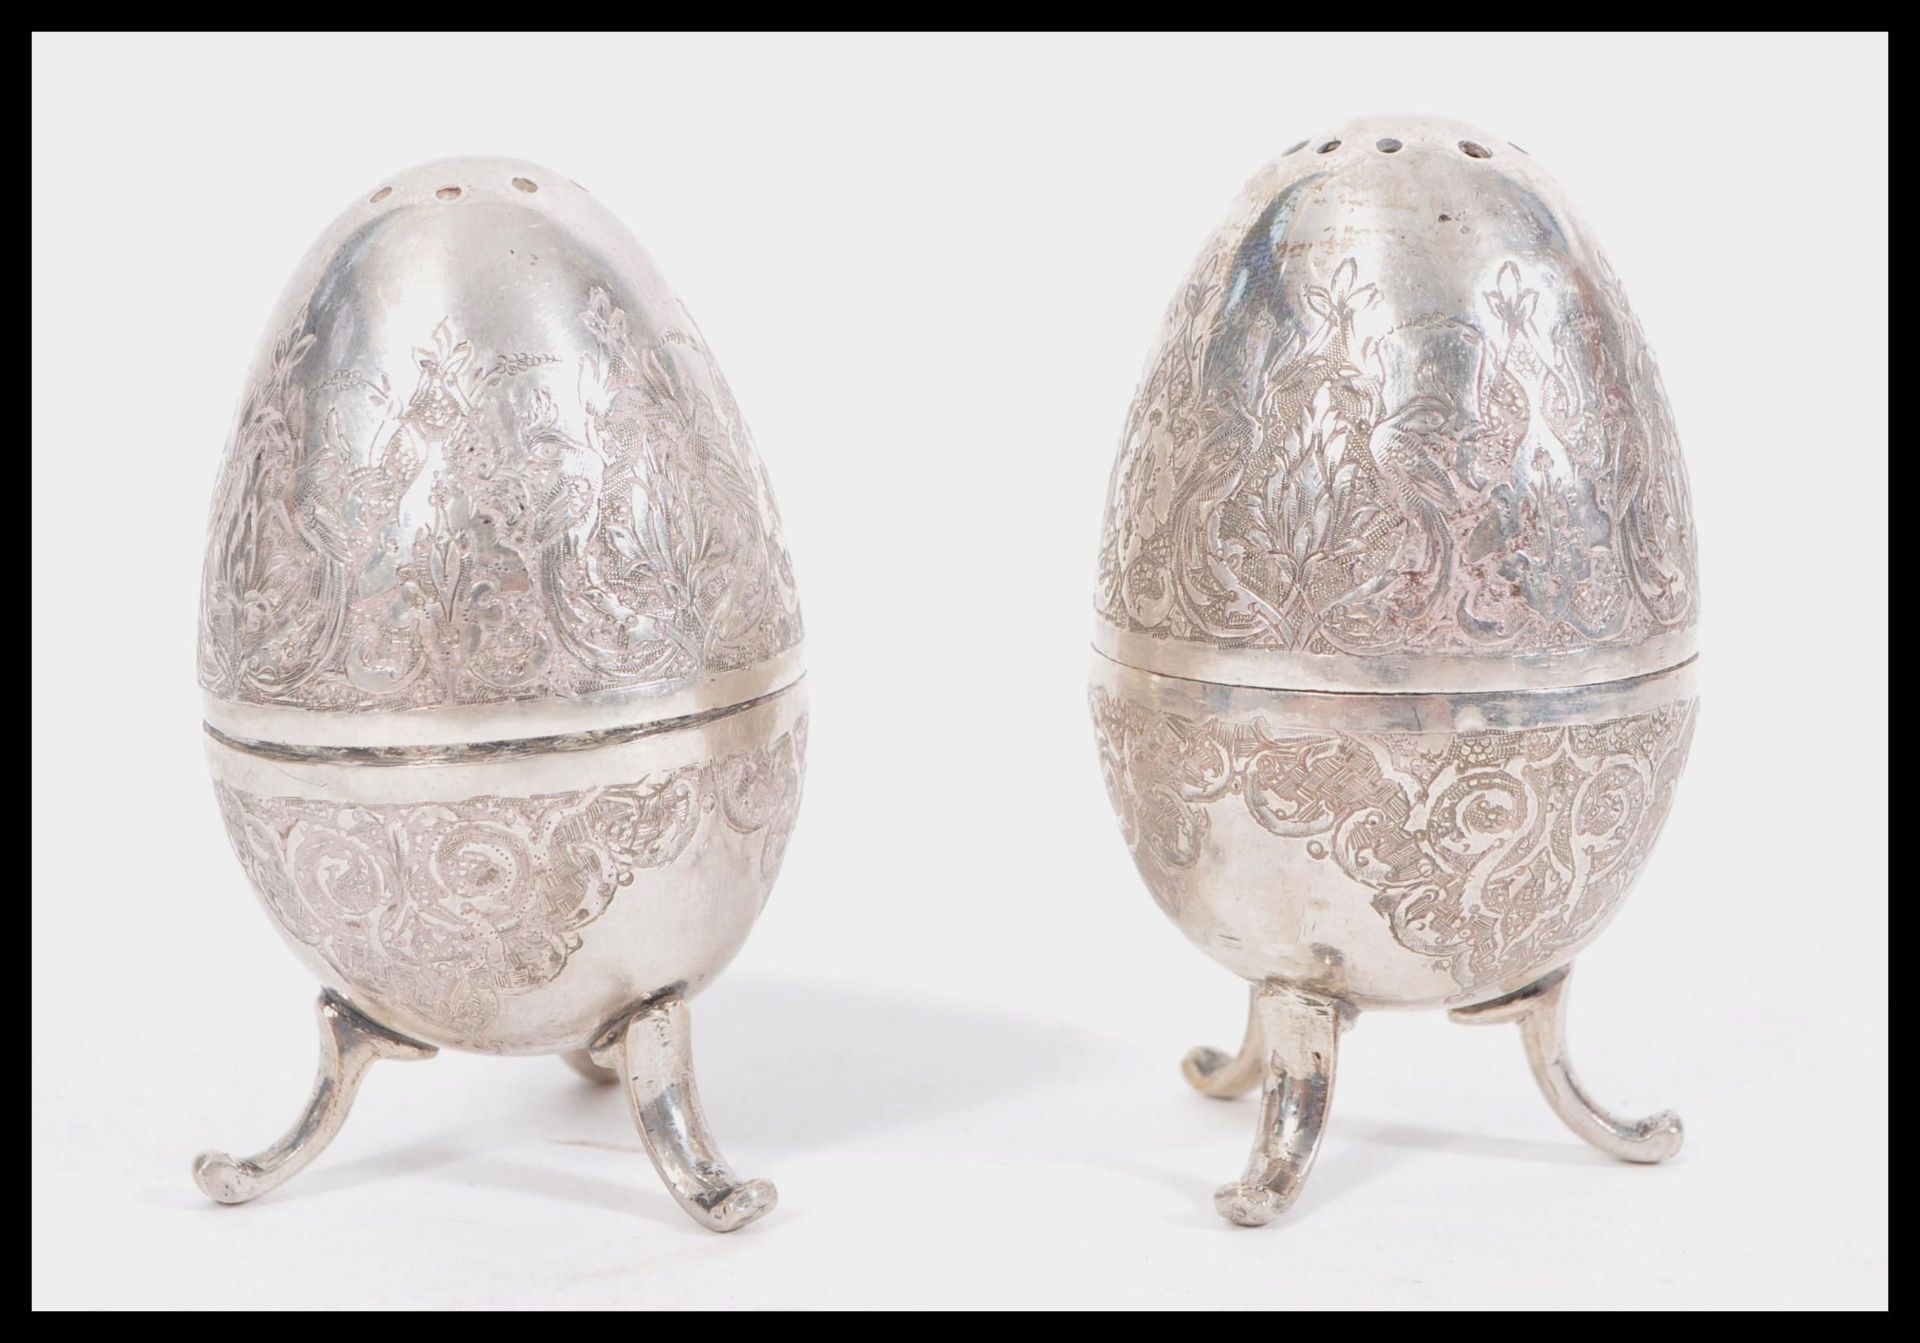 A pair of early 20th Century Arabic silver condiments pepperettes in the form of eggs raised om